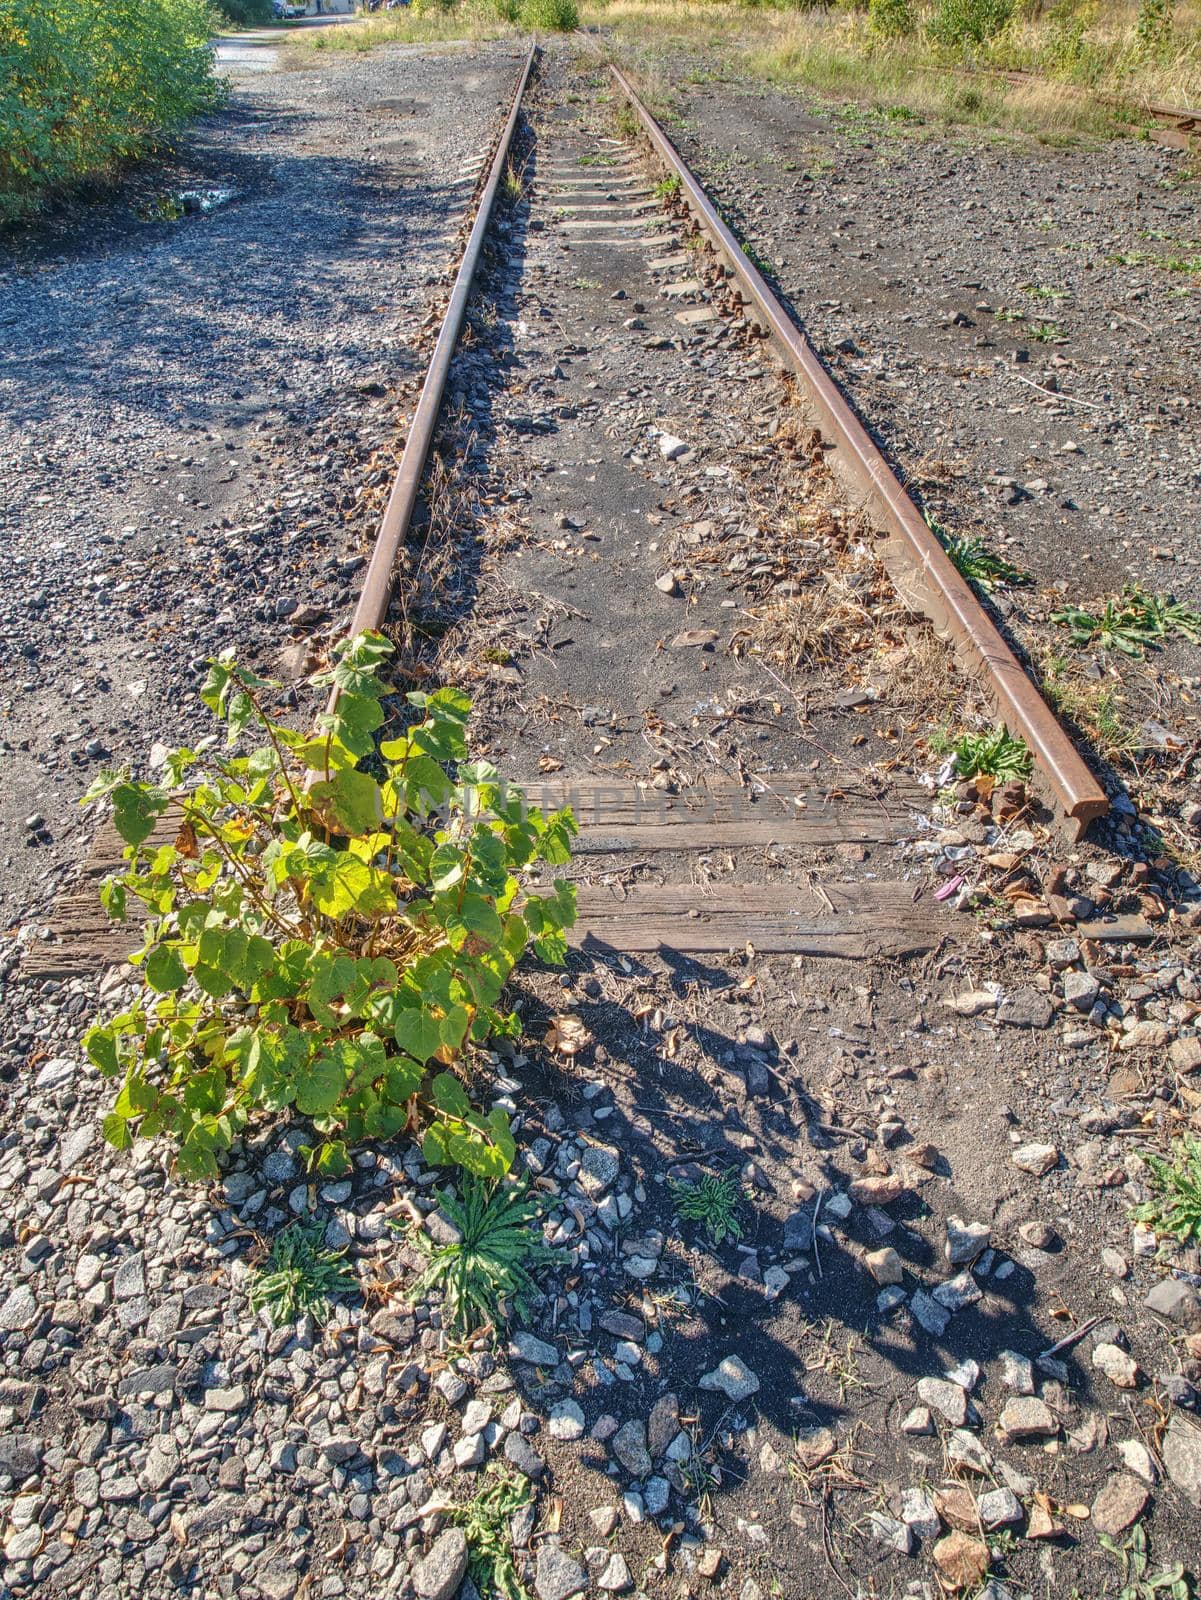 Autogen torch cut rail rod on rotten wooden sleeper. Repair of tramway. Wait for repair and reconstruction of depot.